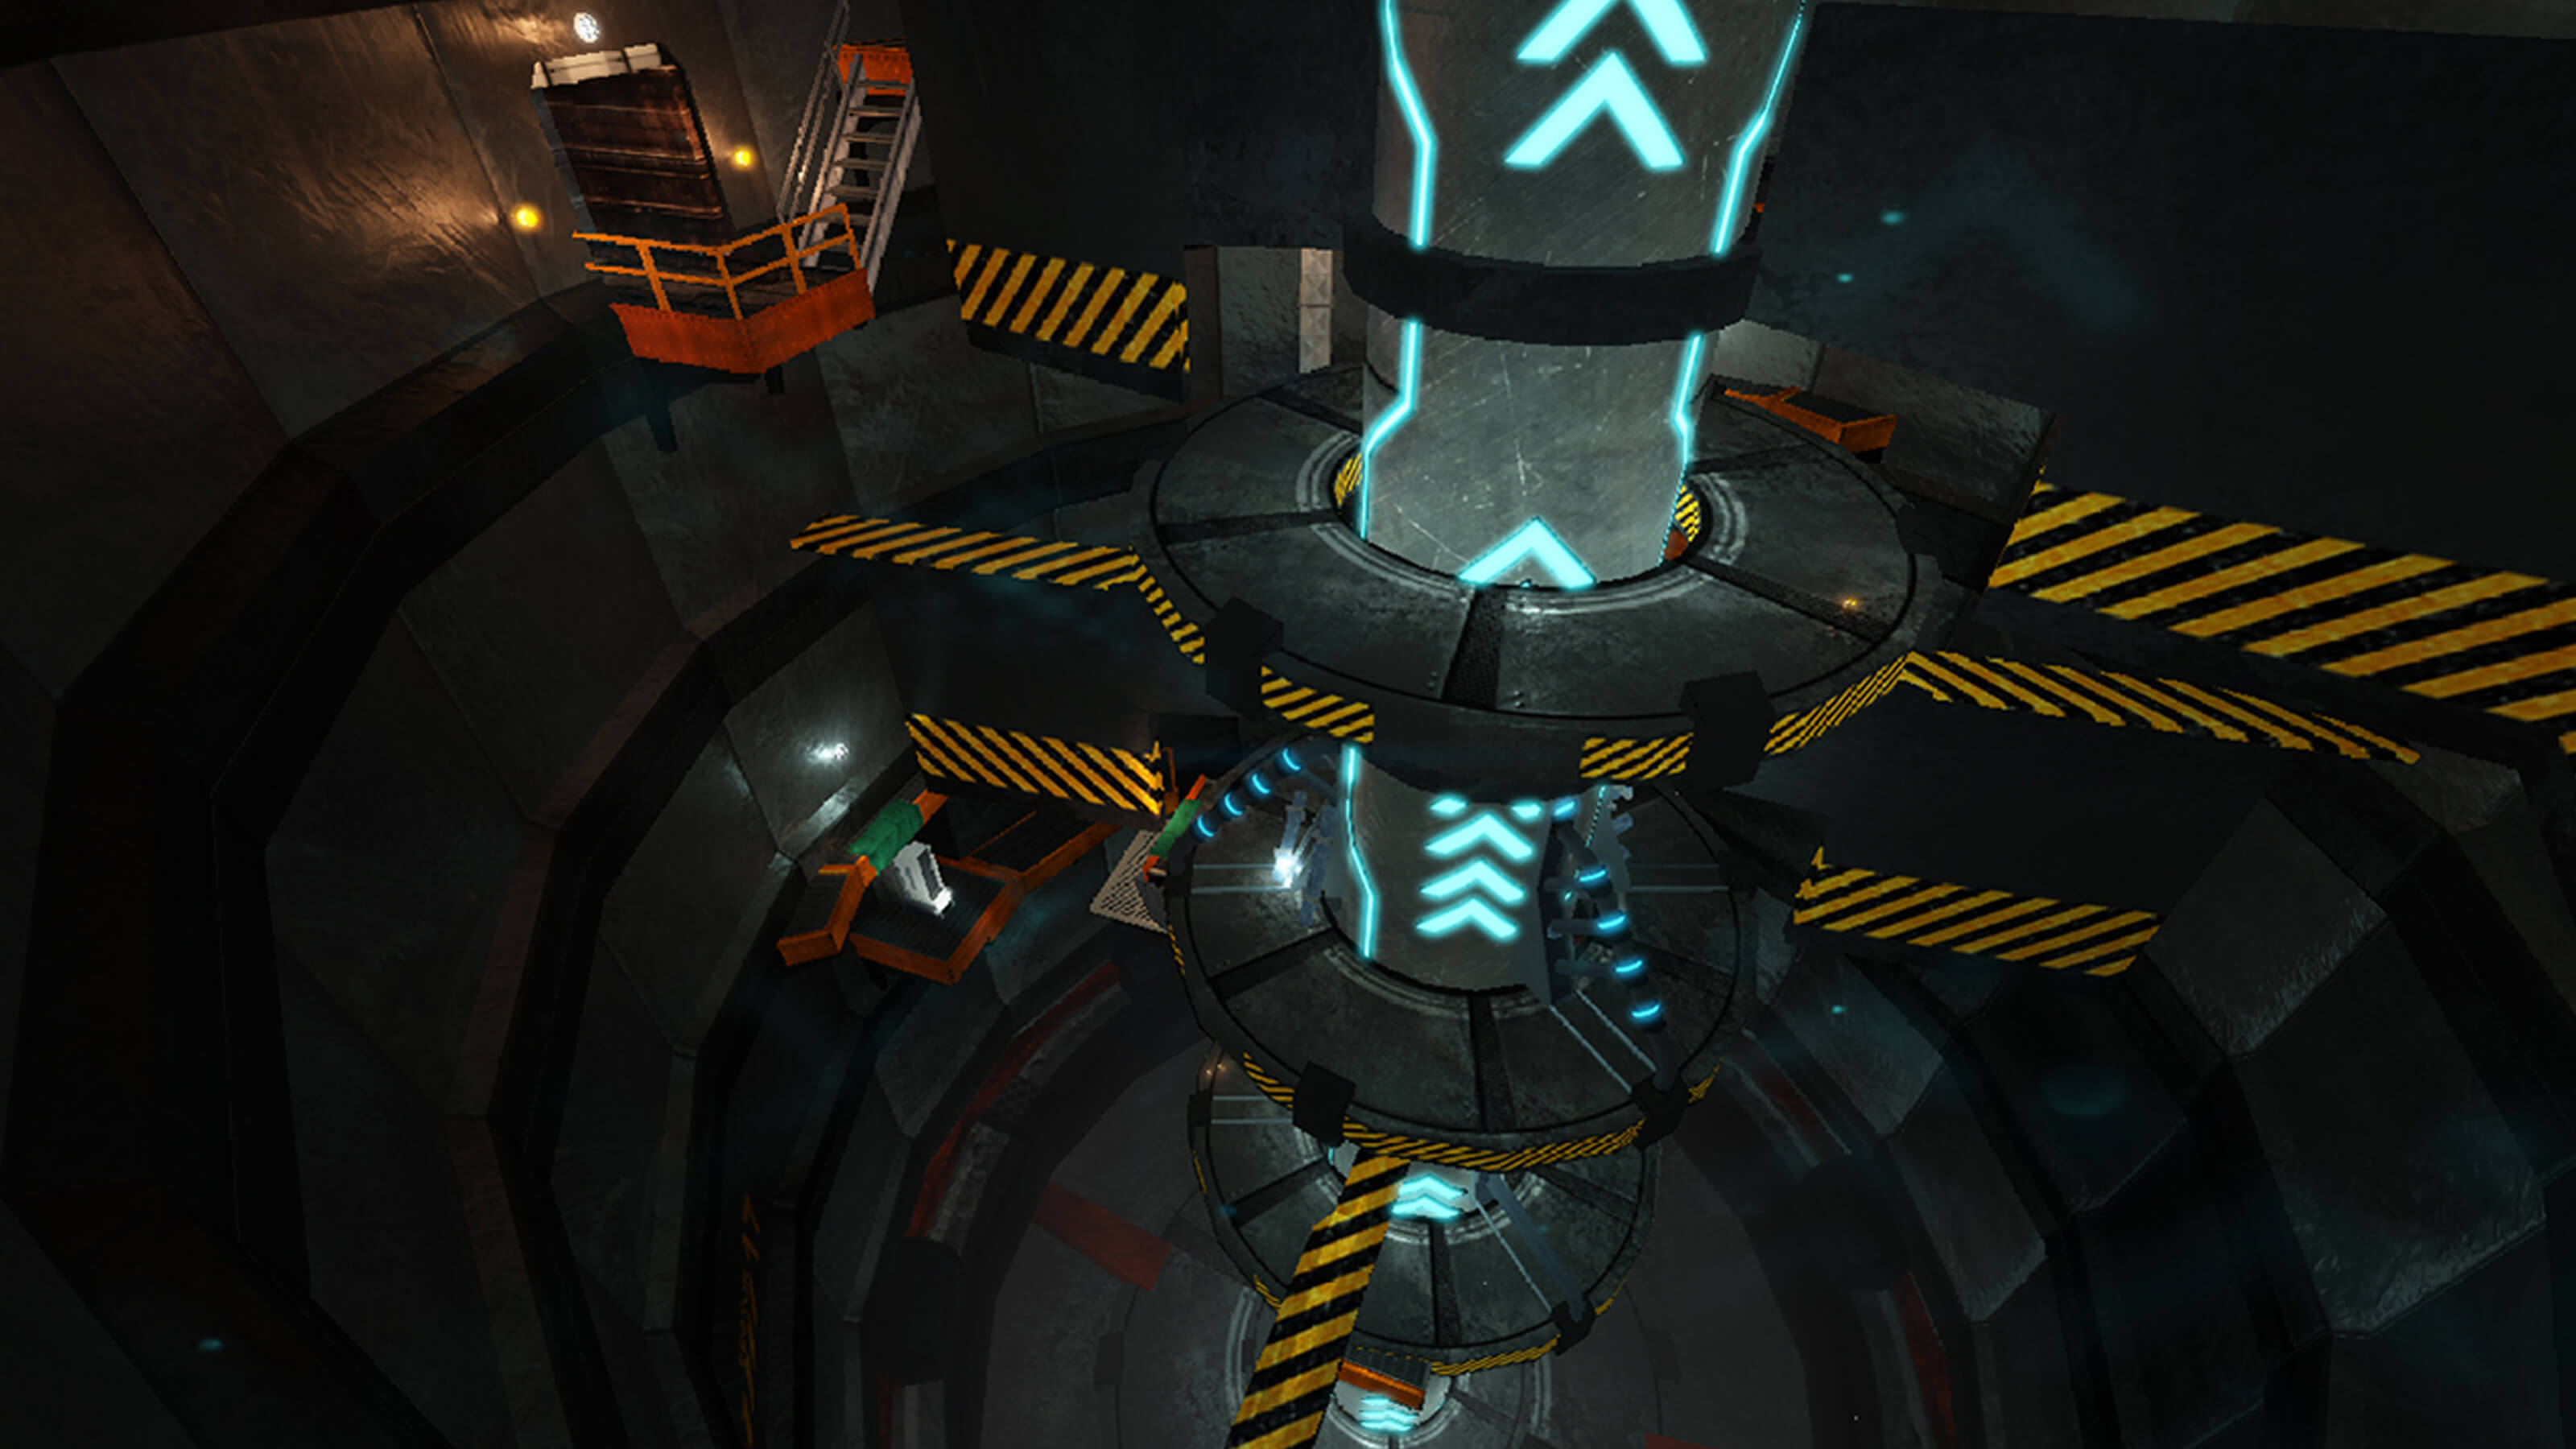 A column marked with glowing blue indicators rises up several stories from the ground to the player's level